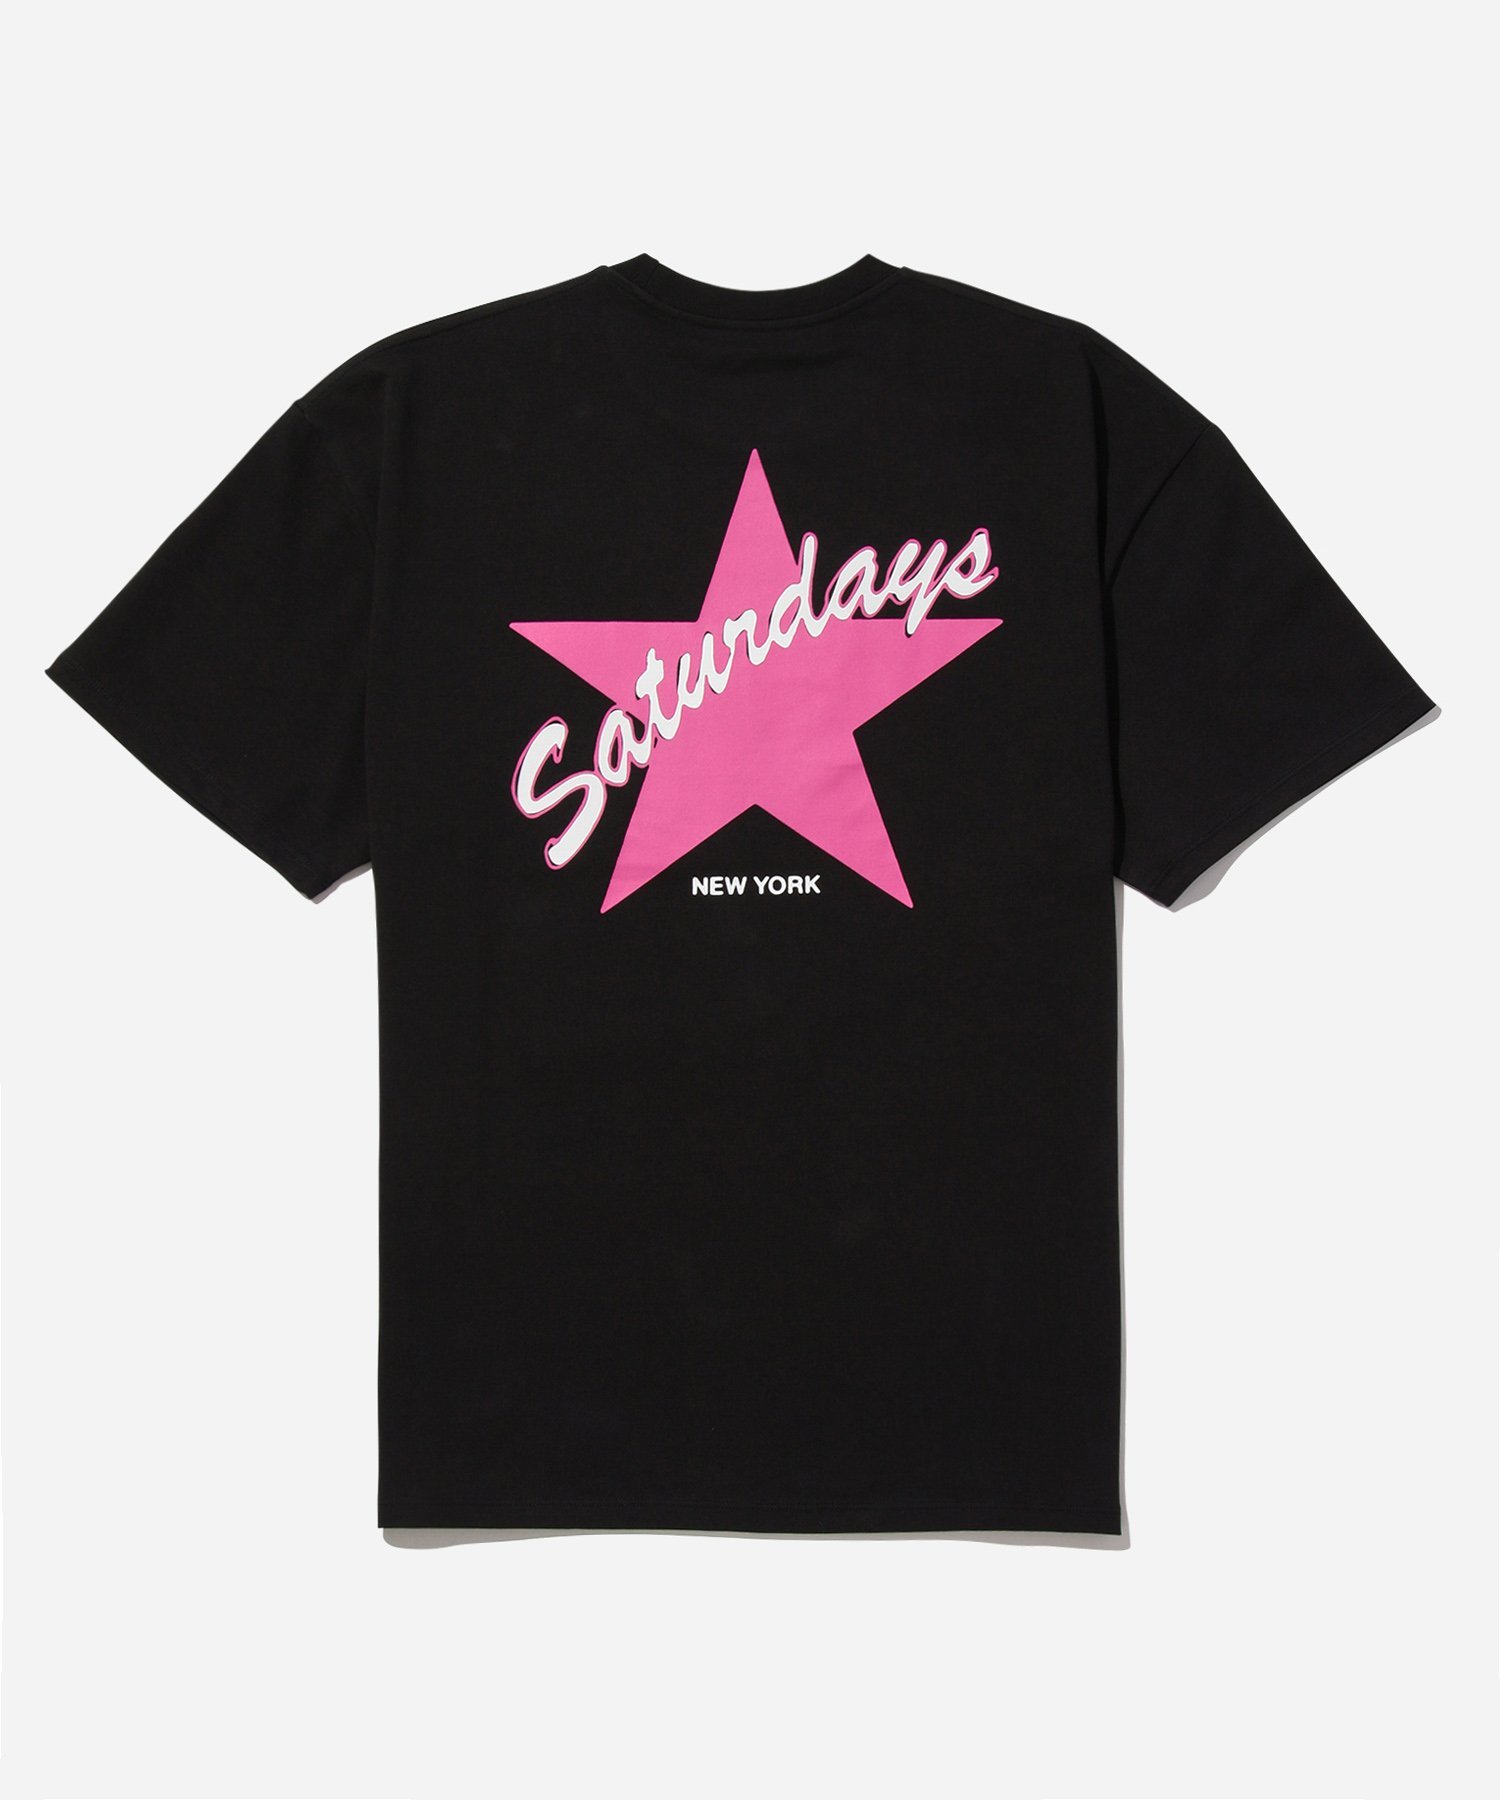 【SALE／30%OFF】Saturdays NYC Saturdays Star Relaxed Ss Tee サタデーズ　ニューヨークシティ トップス カットソー・Tシャツ ブラッ..